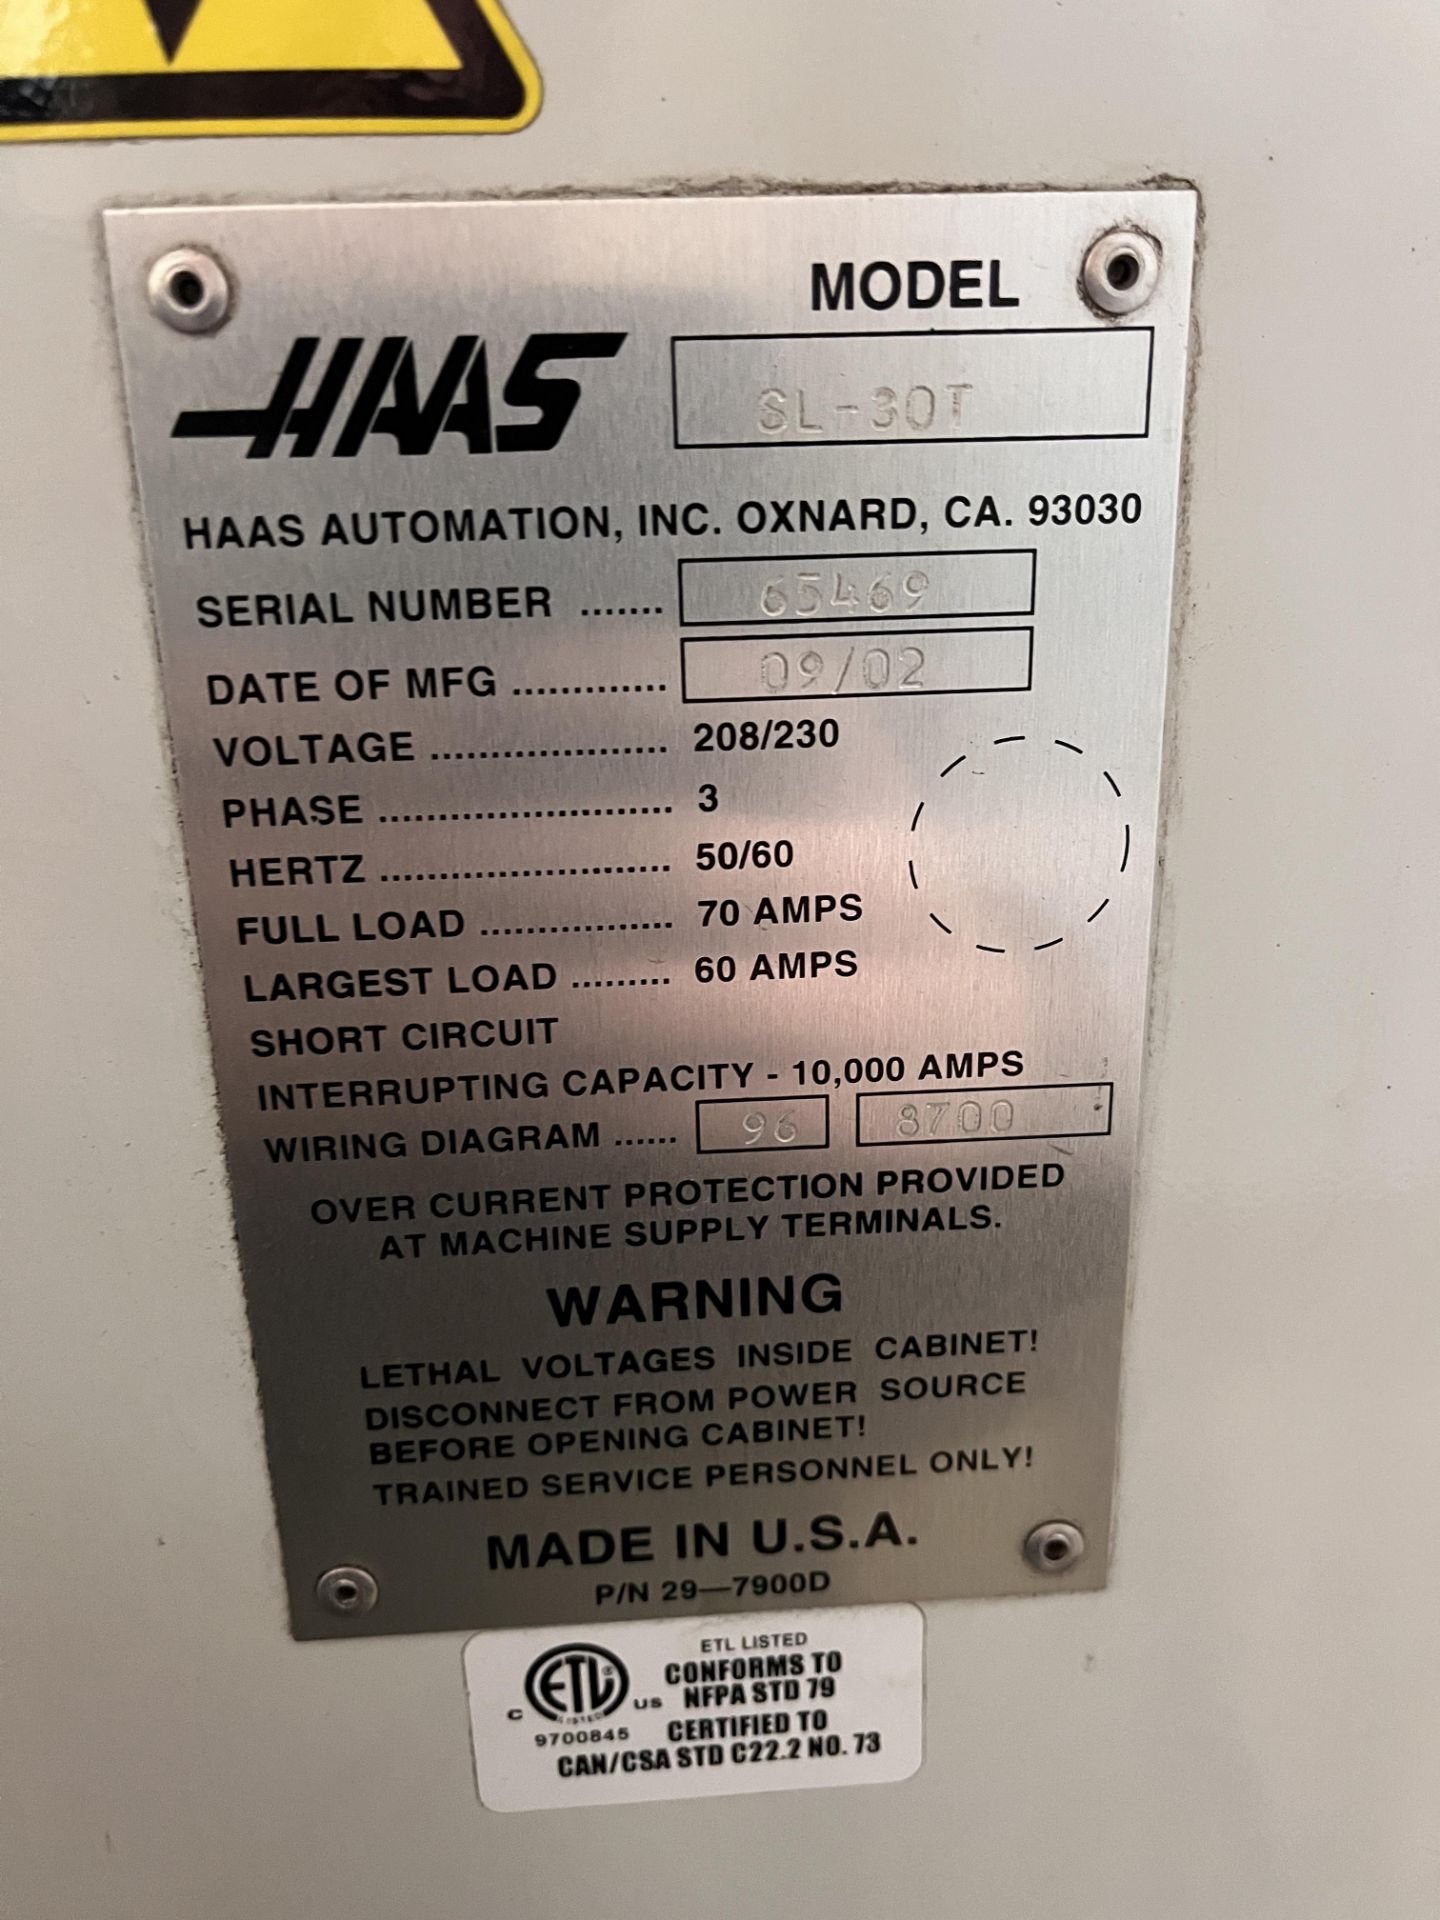 2002 Haas SL-30T CNC Turning Center, ONLY 4367 hrs, See lots to follow for tooling and accessories - Image 16 of 22